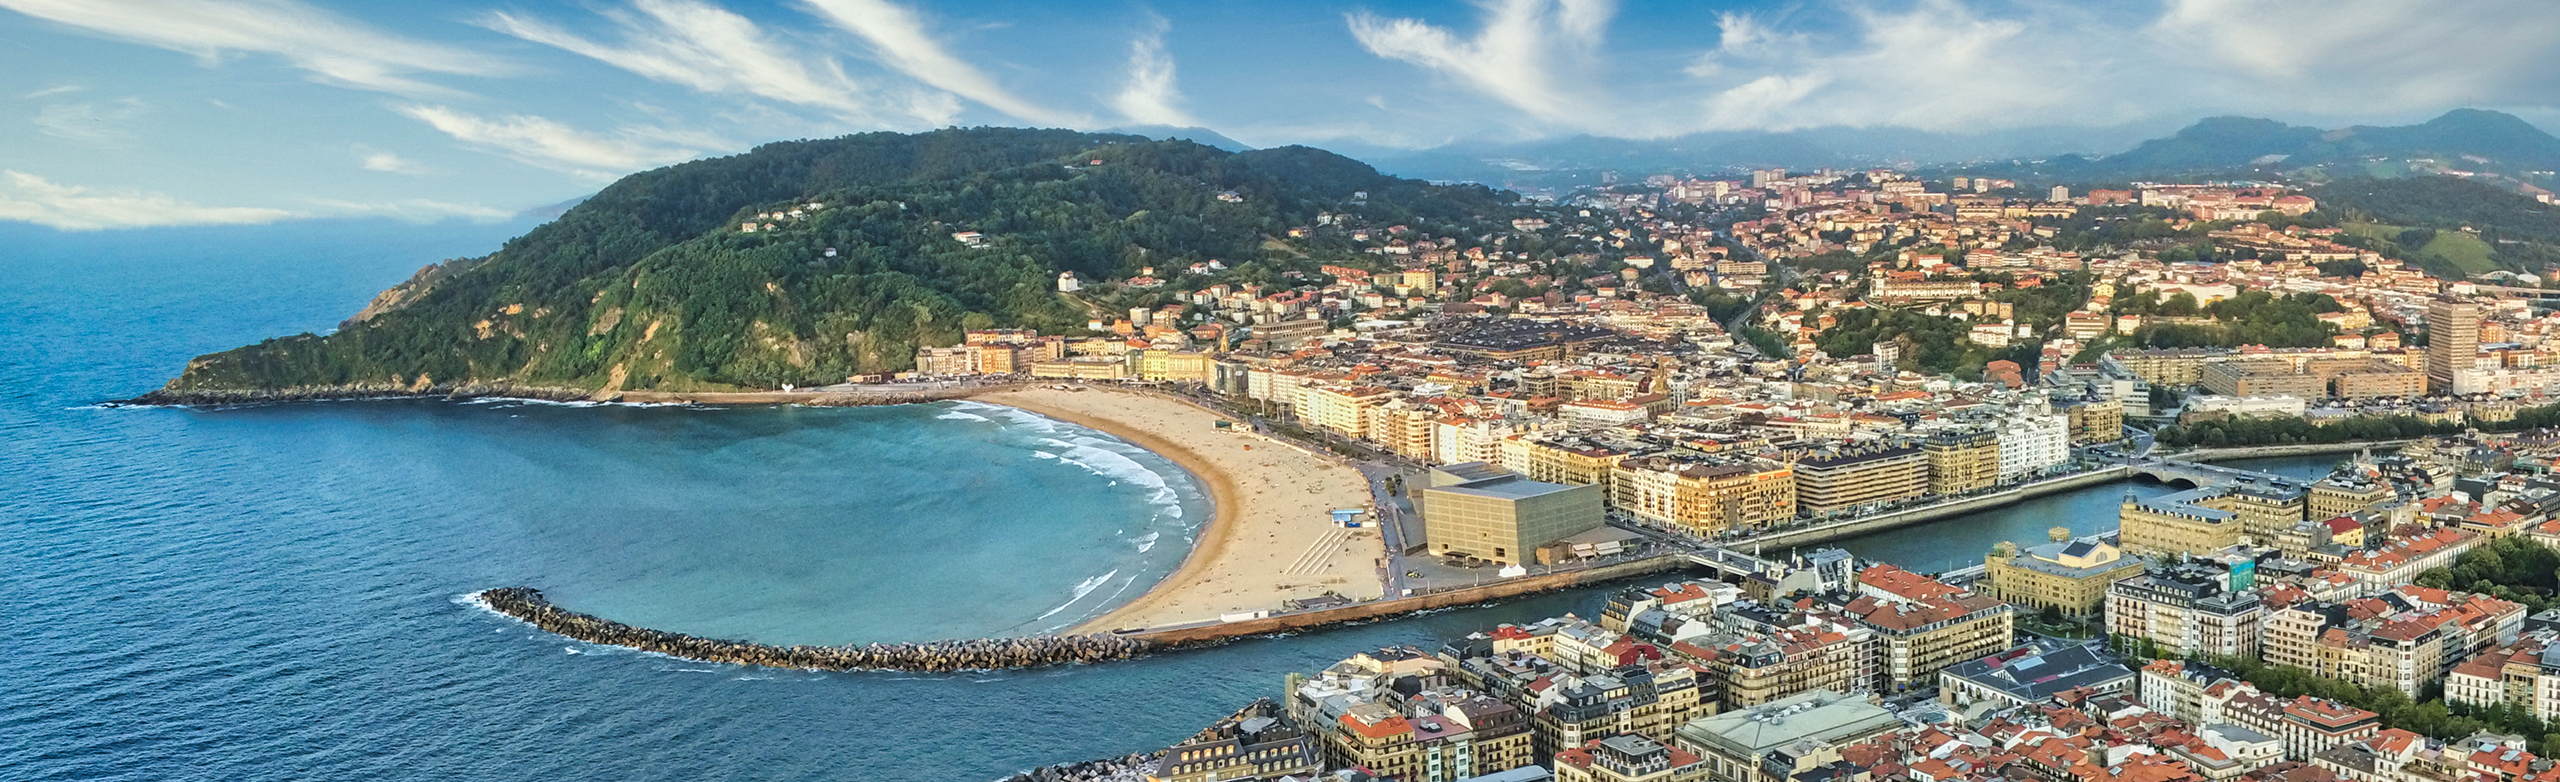 The basque country of spain, Bilbao coastline with city front